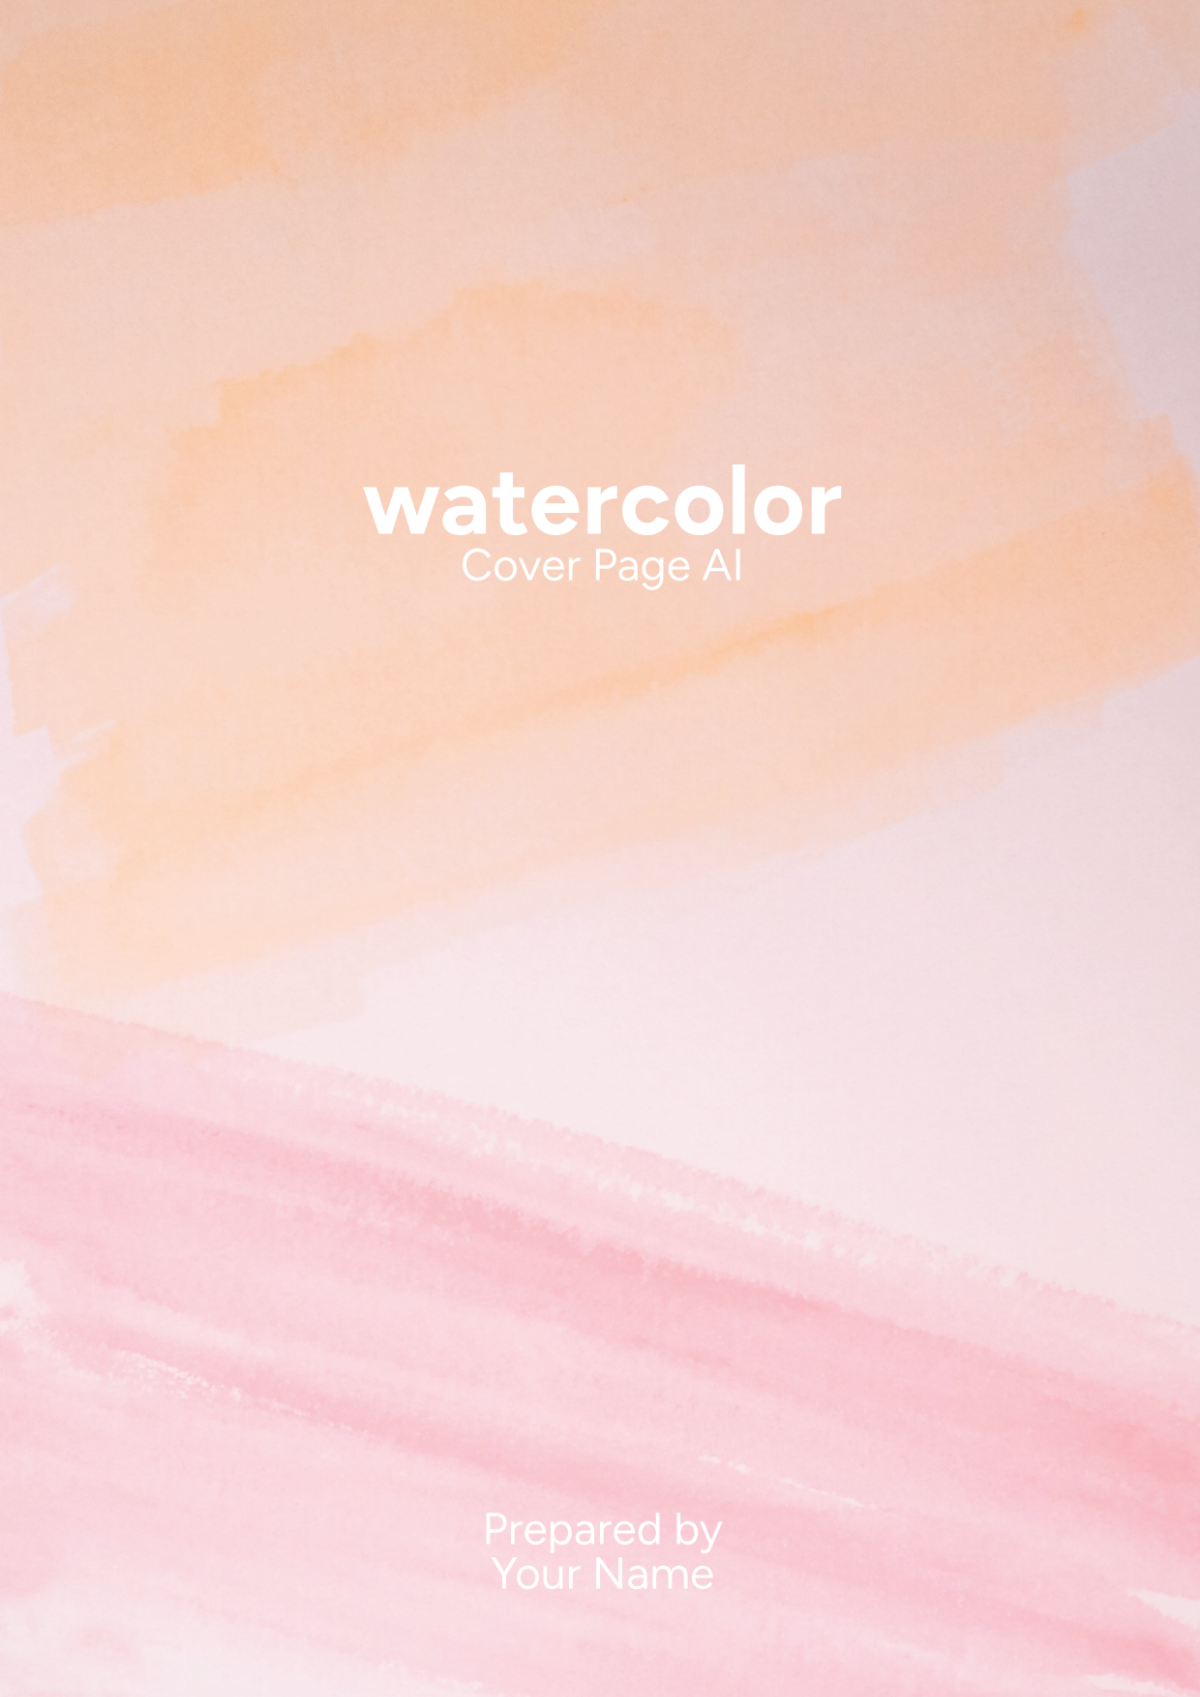 Watercolor Cover Page AI Template